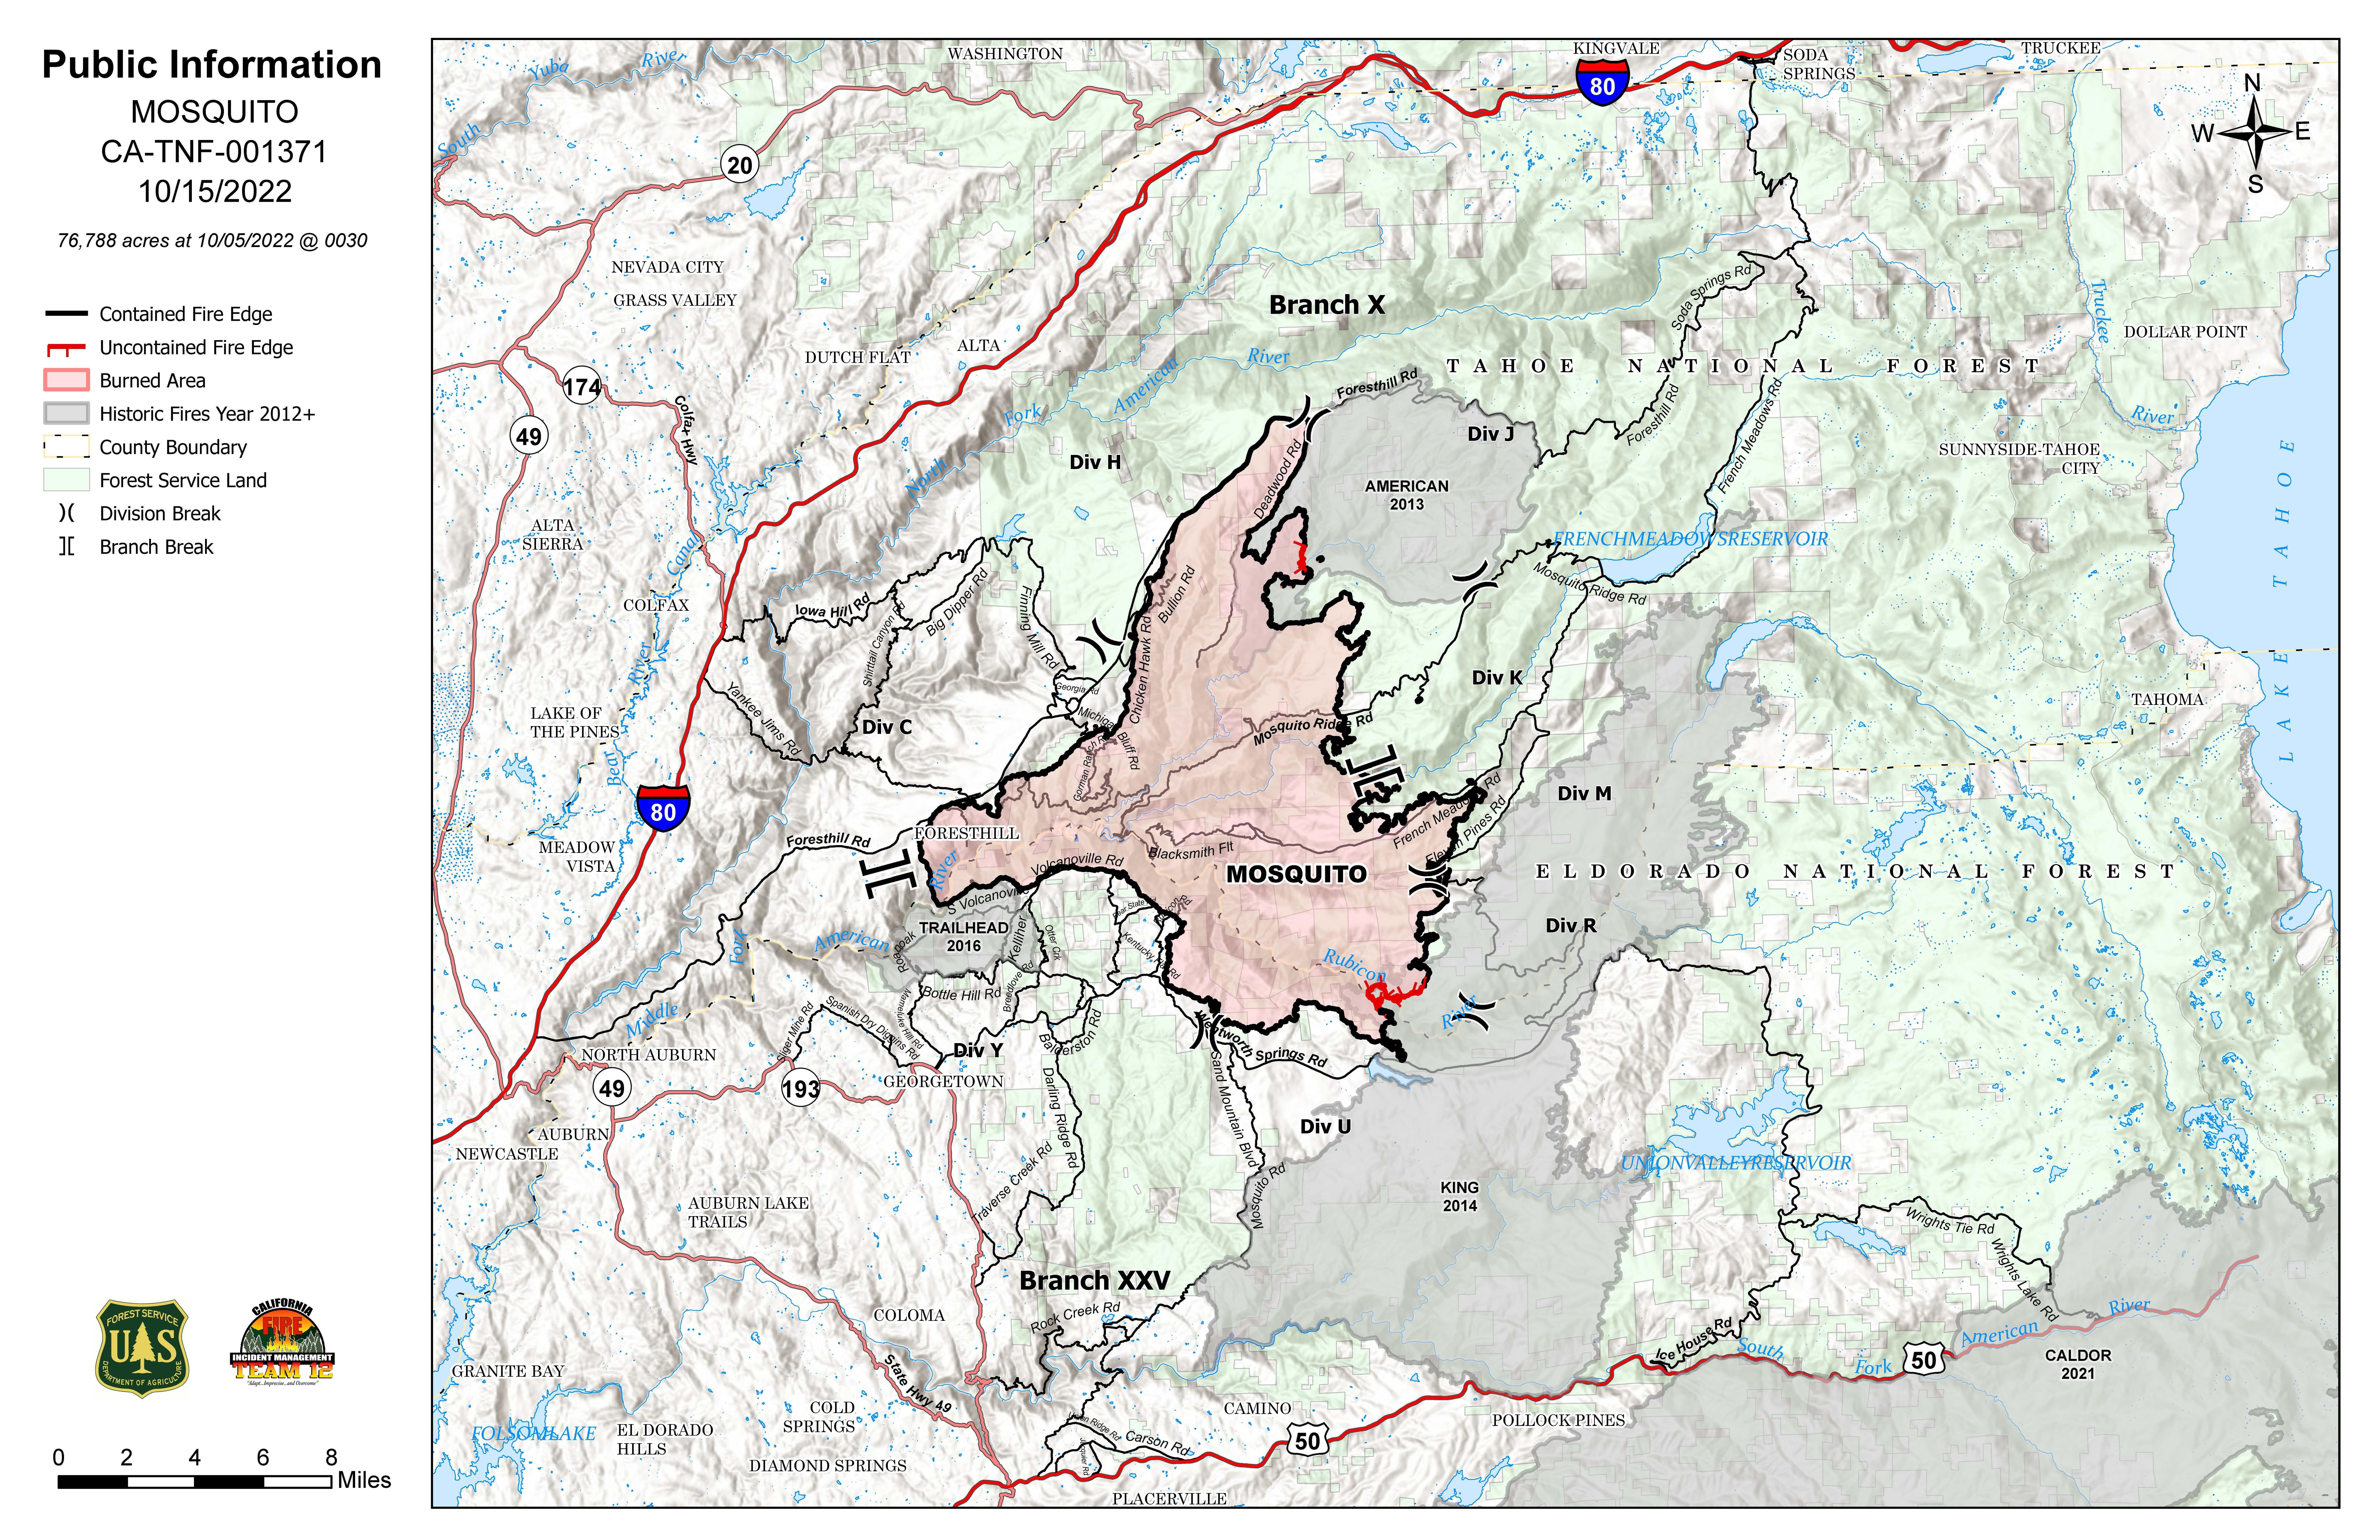 Mosquito Fire Public Information Map (10-15-2022)